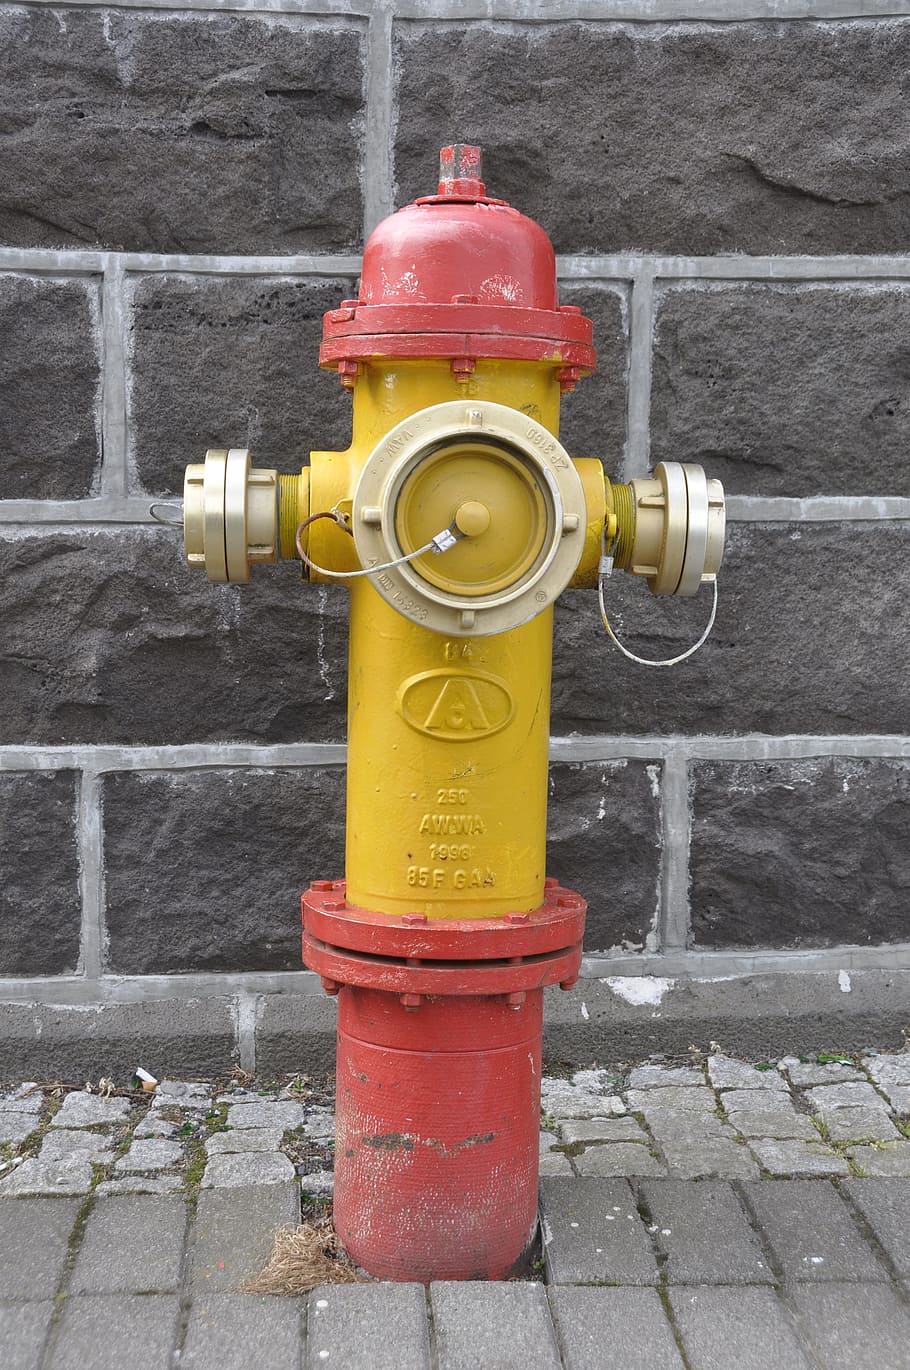 fire, hydrant, water, street, city, emergency, protection, equipment, rescue, hose